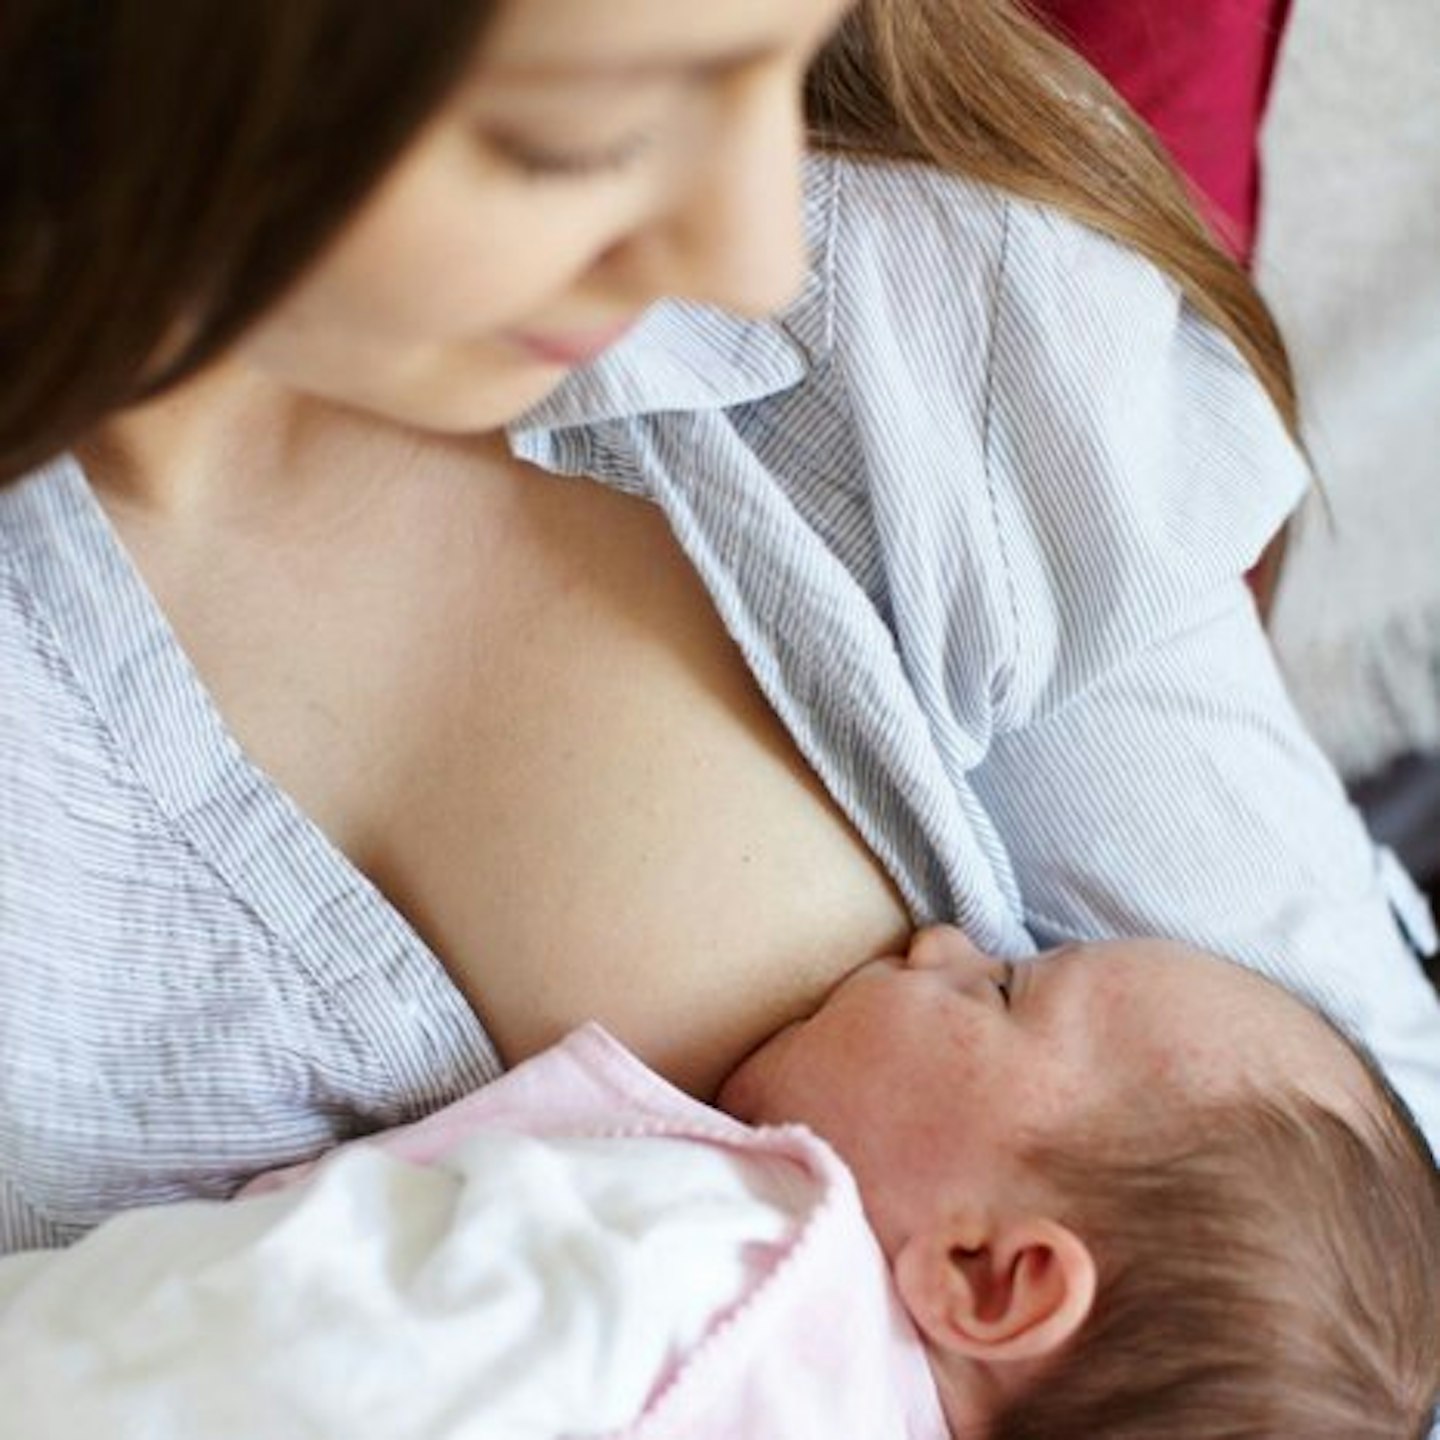 Breastfeeding photos have been described as "inappropriate" on social media